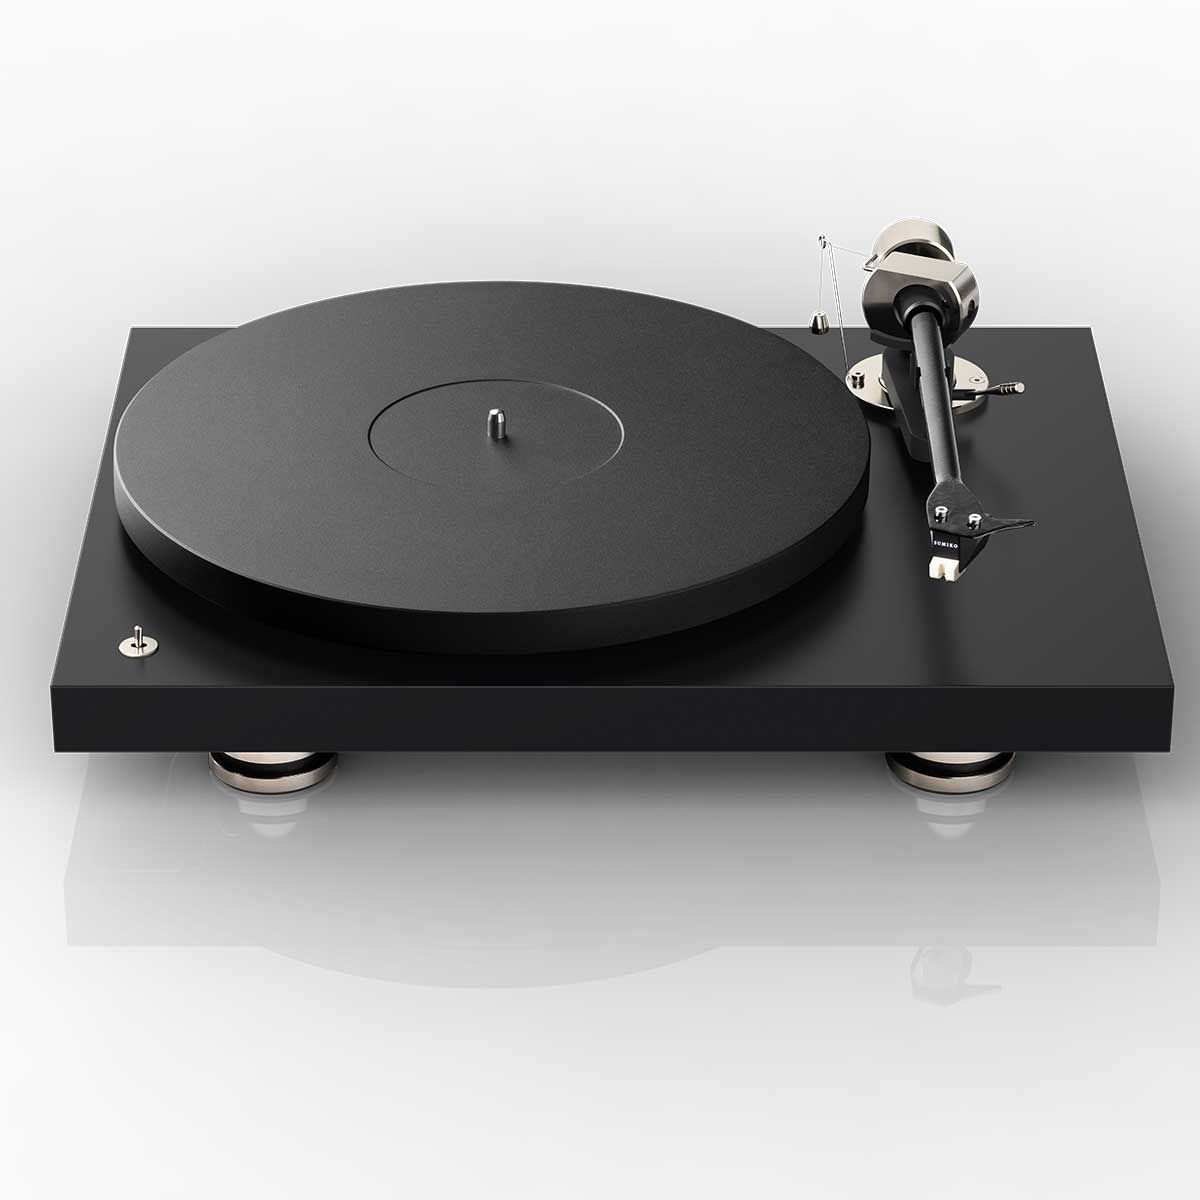 Pro-Ject Debut PRO Turntable, Satin Black, front top view